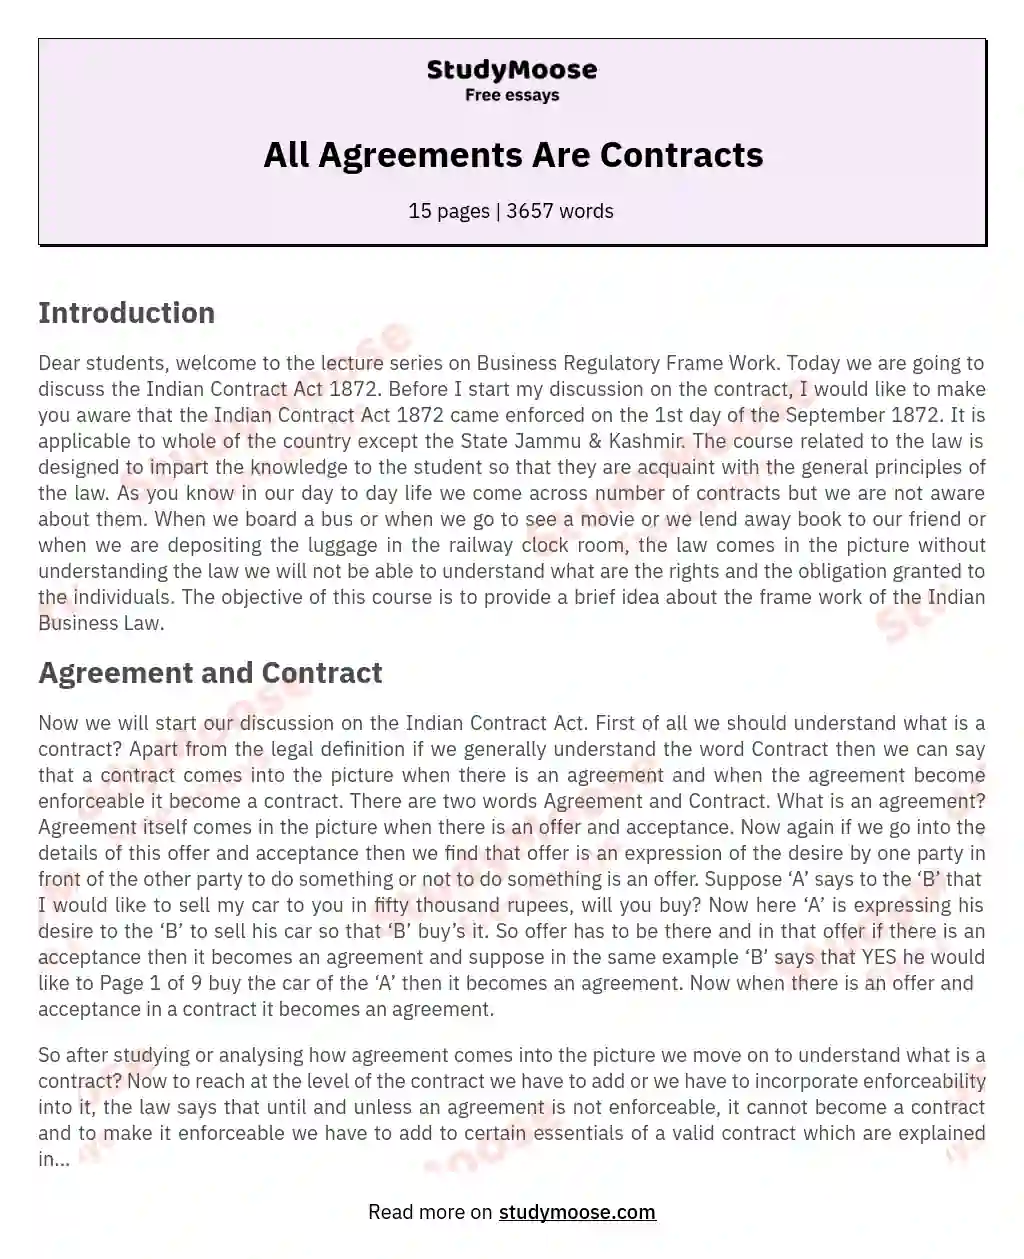 All Agreements Are Contracts essay